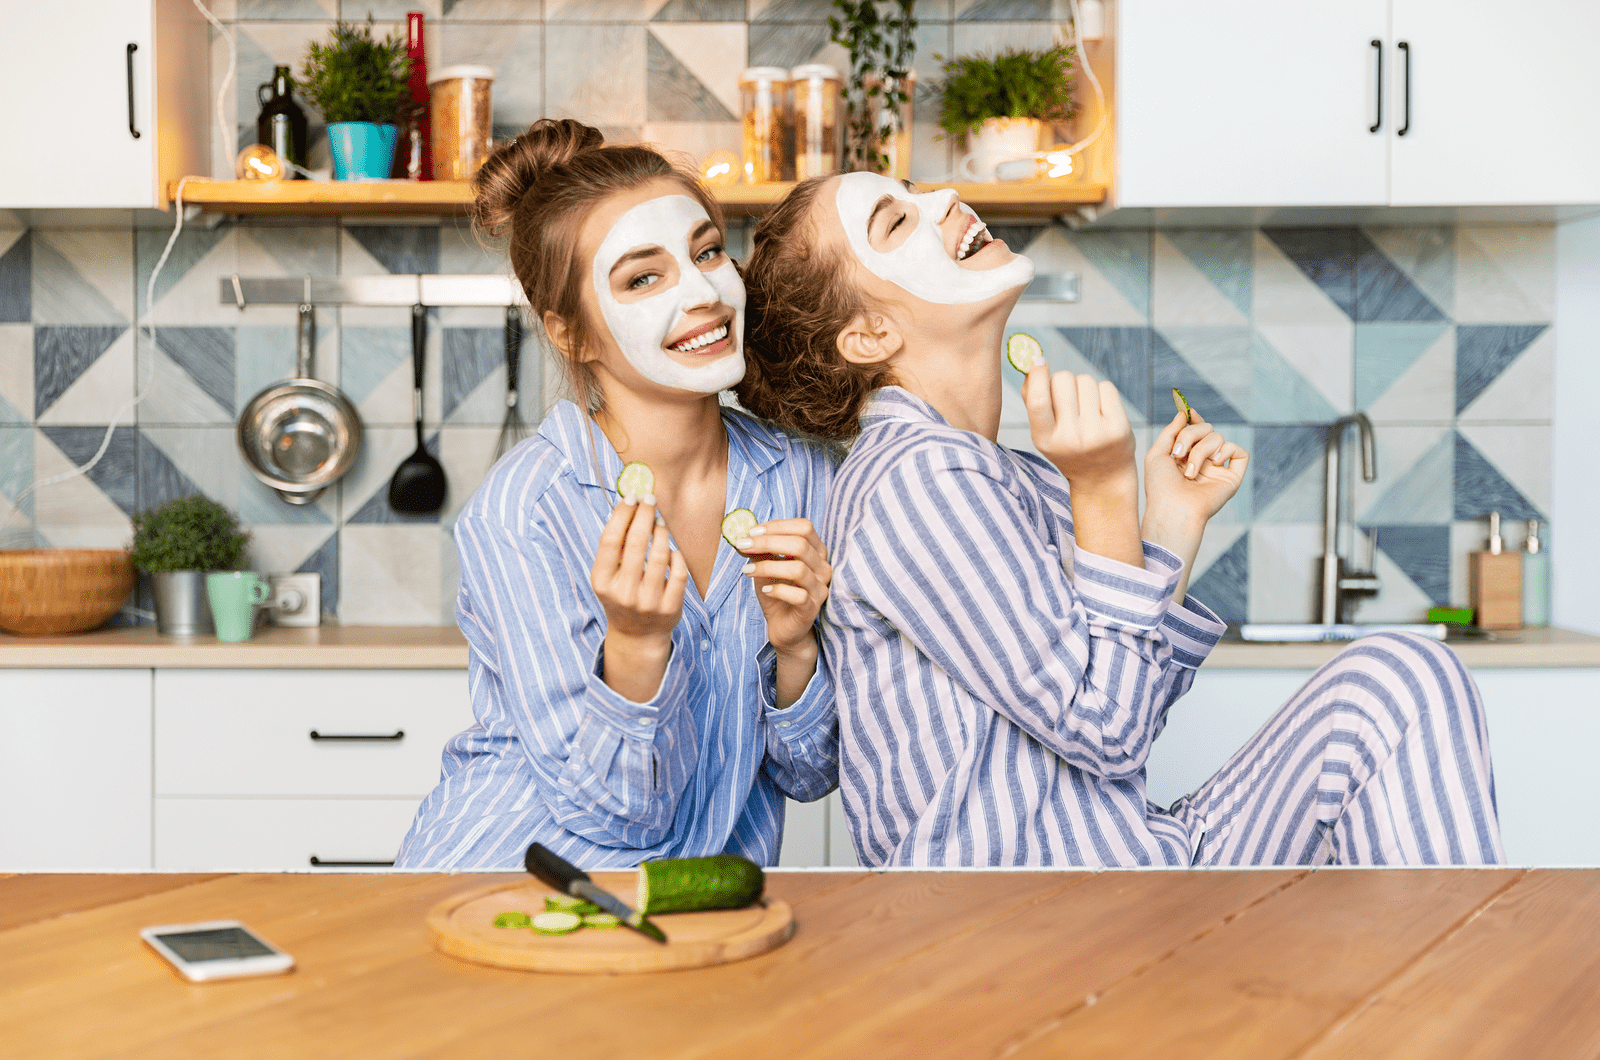 two best friends laughing and having fun on kitchen